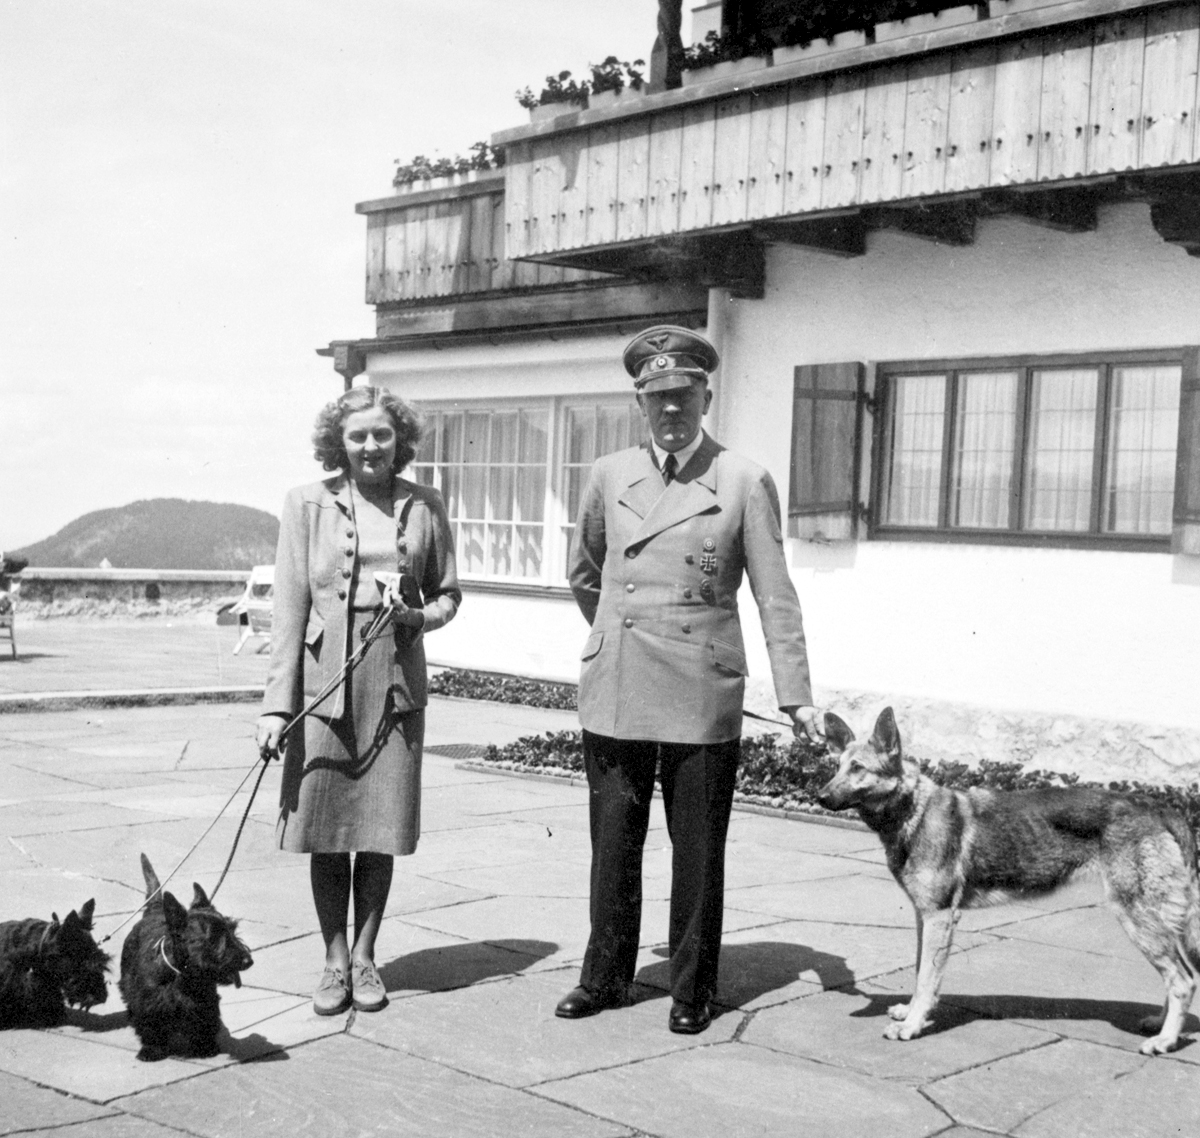 Adolf Hitler and Eva Braun, with their dogs at the Berghof, from Eva Braun's albums